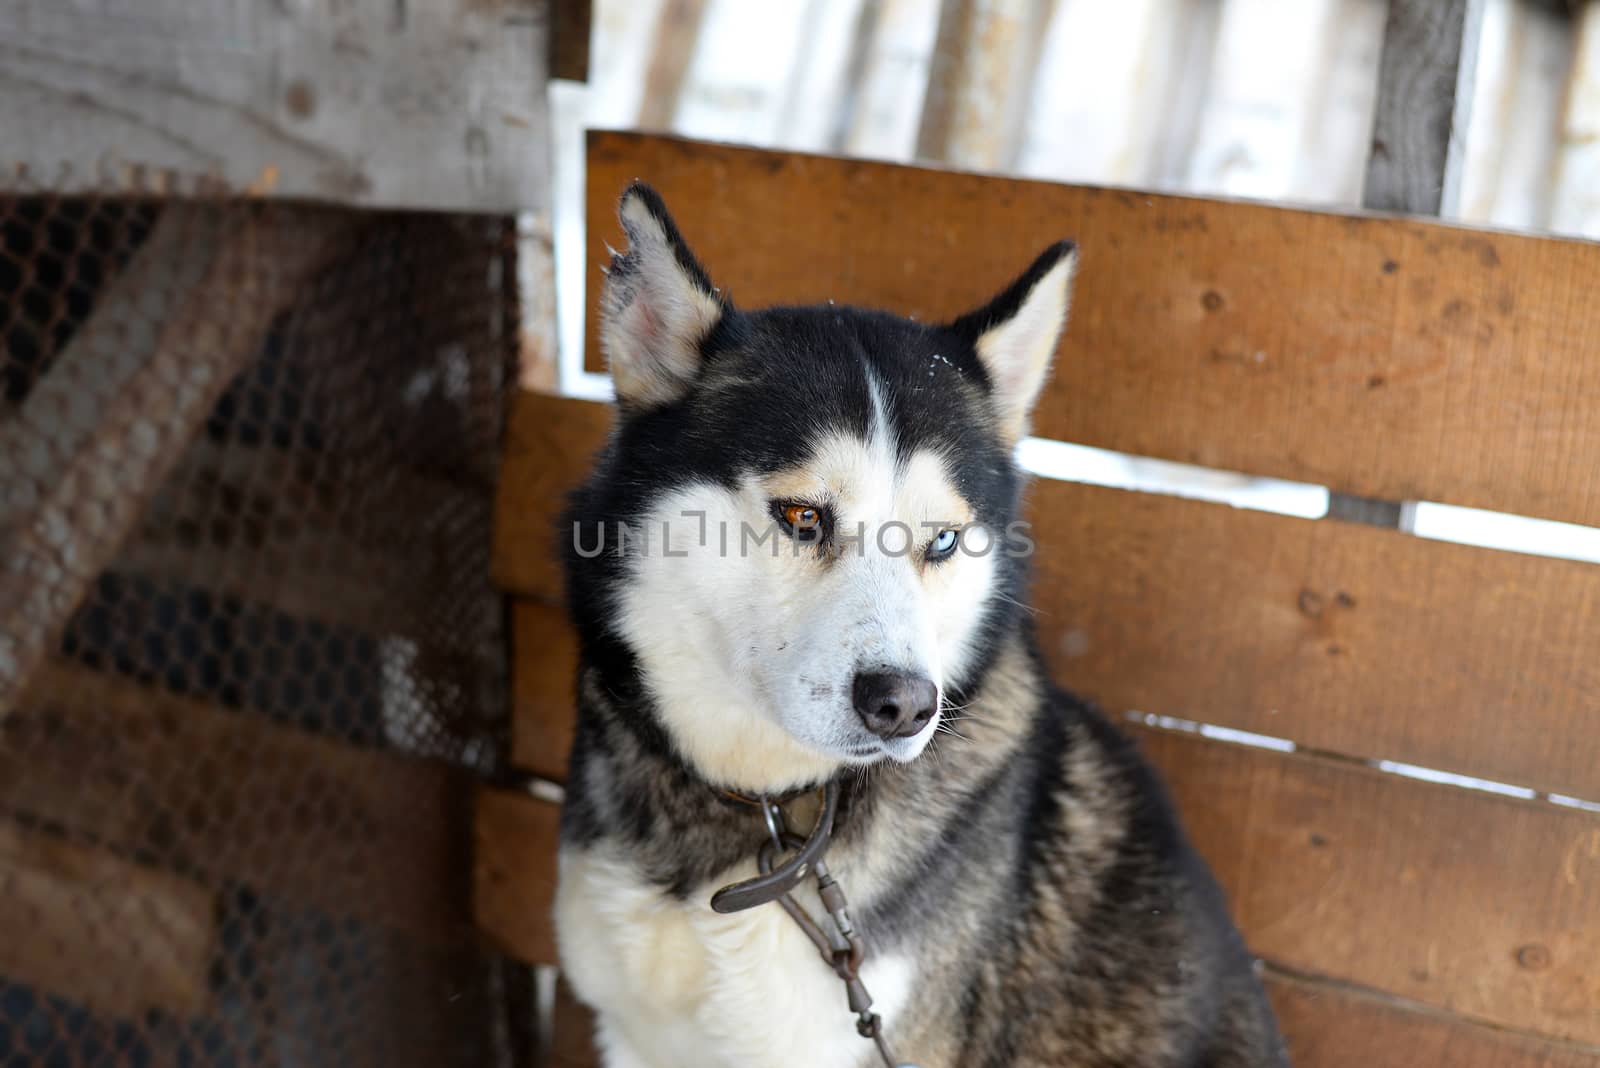 Goodness Siberian Husky a reliable friend, sled and working dog